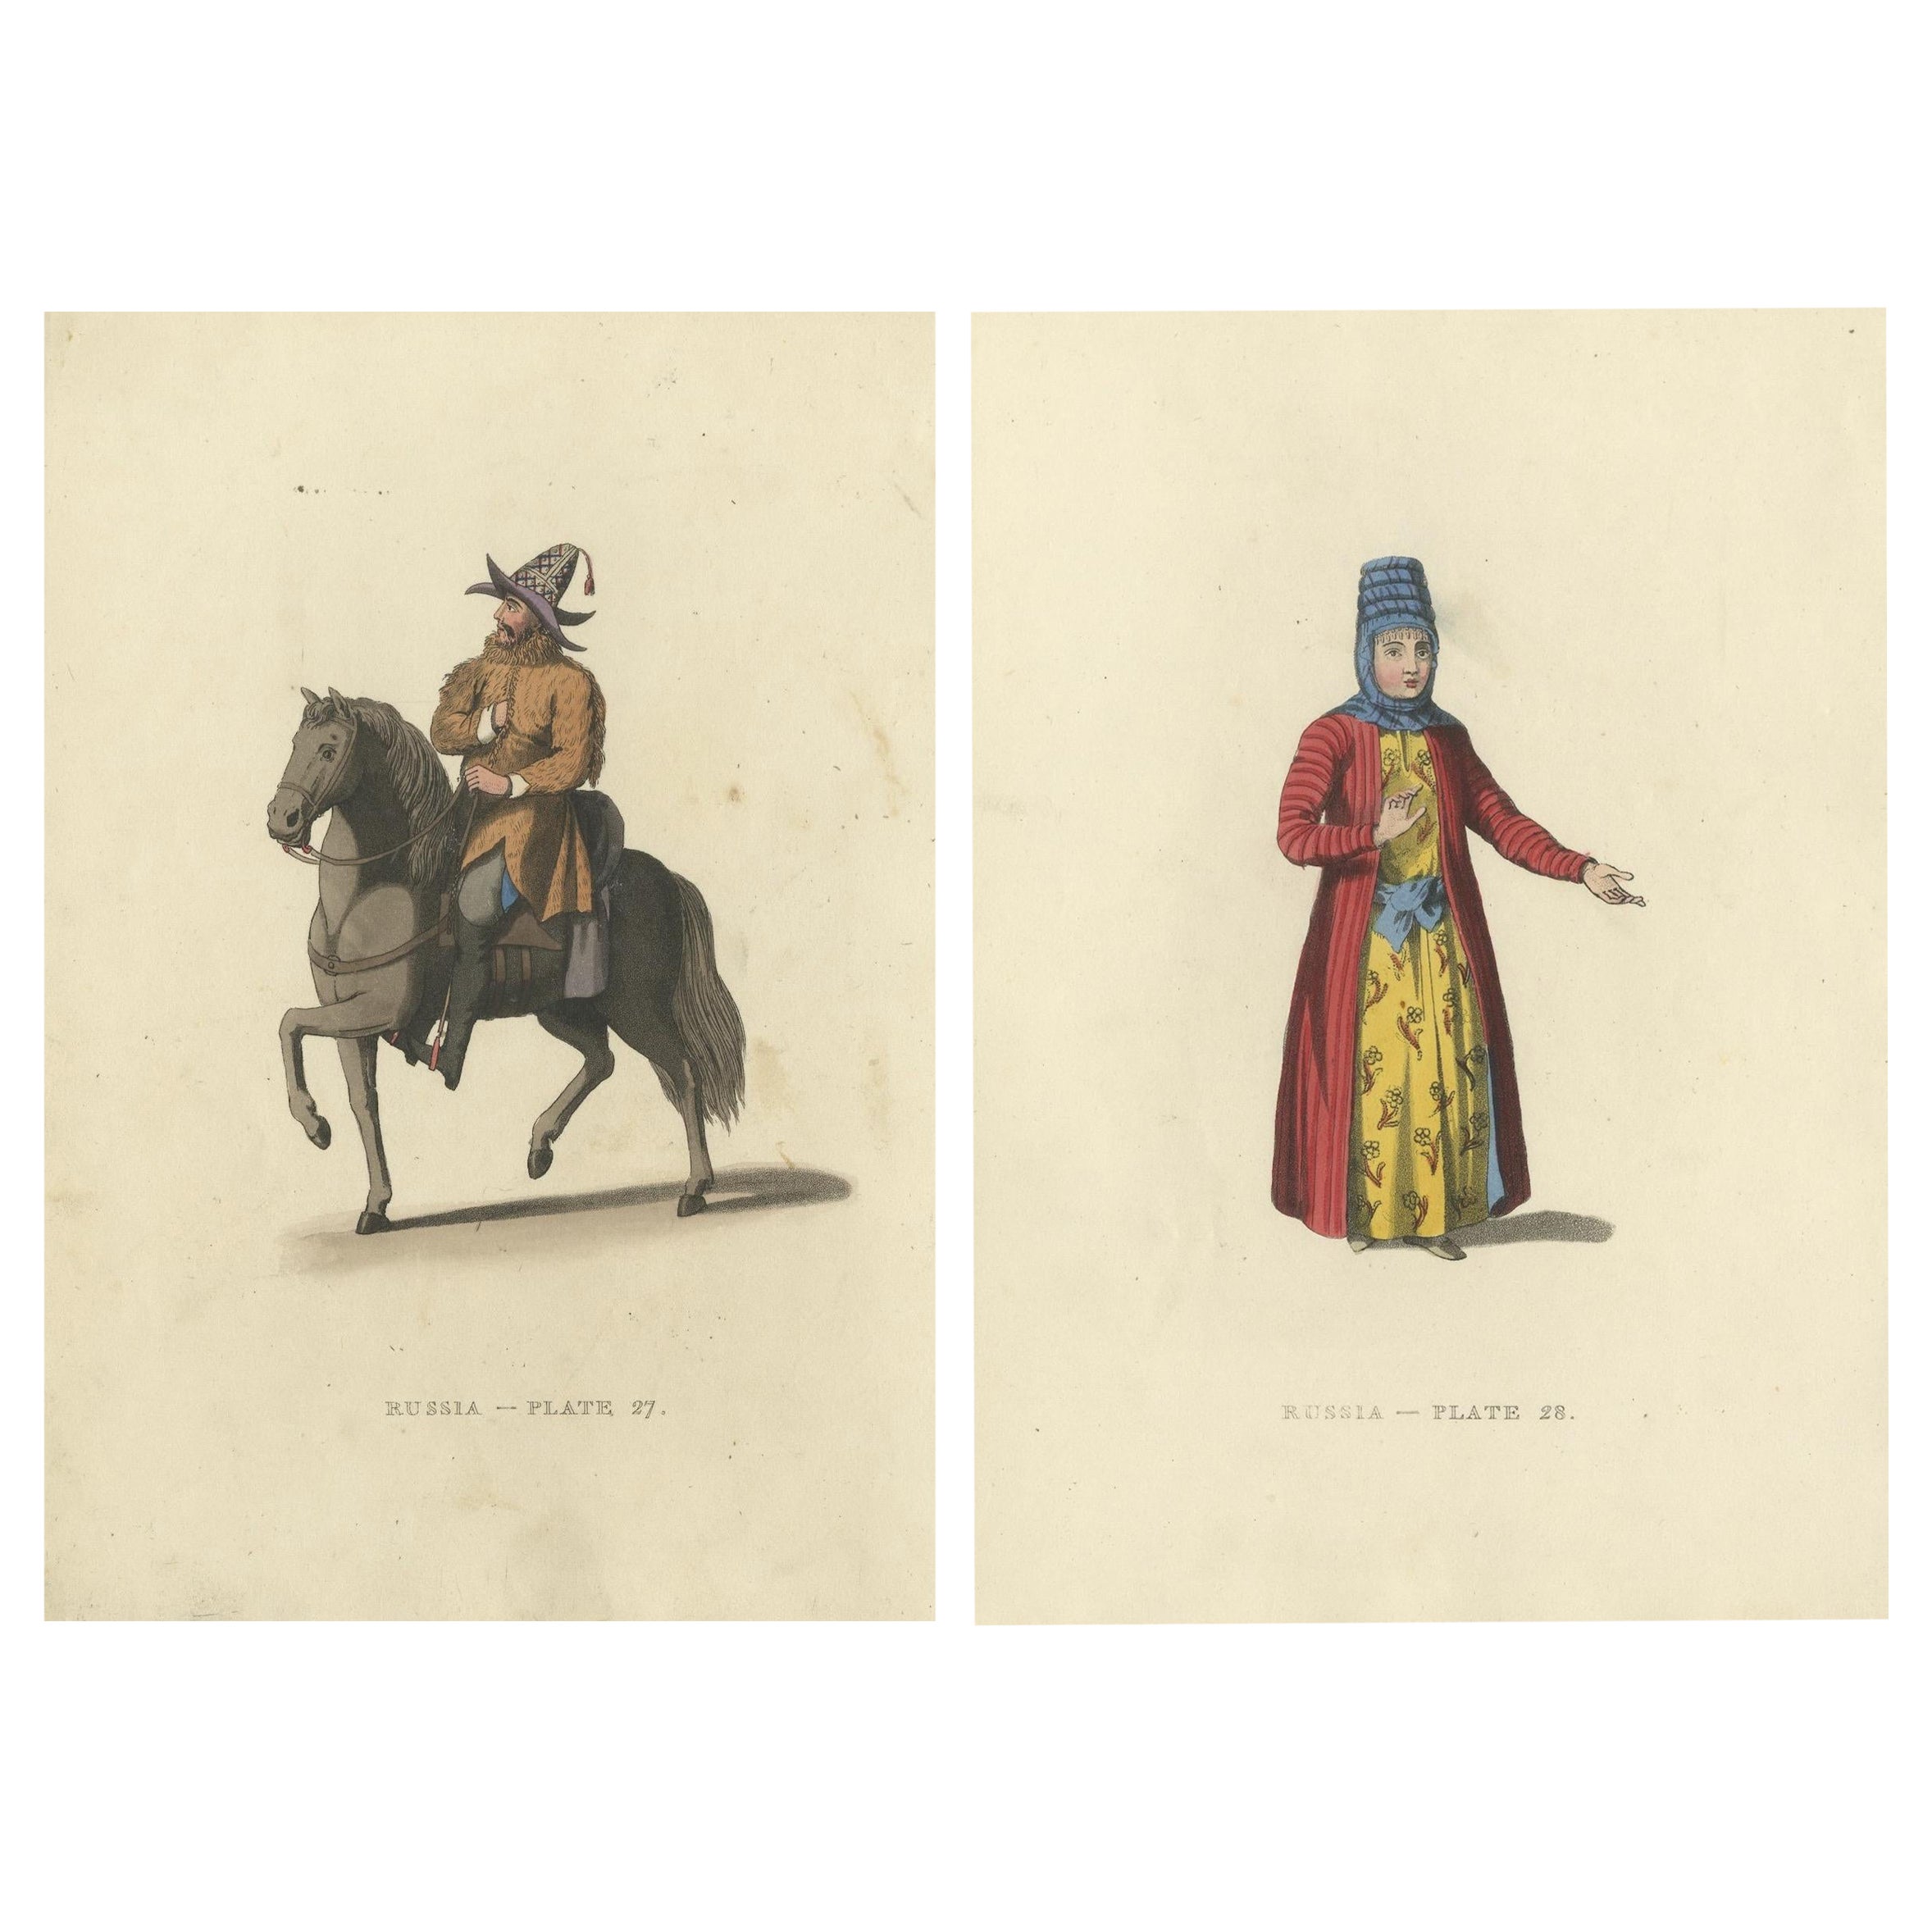 Kirghiz Elegance Engraved: A Study of 19th Century Central Asian Attire, 1814